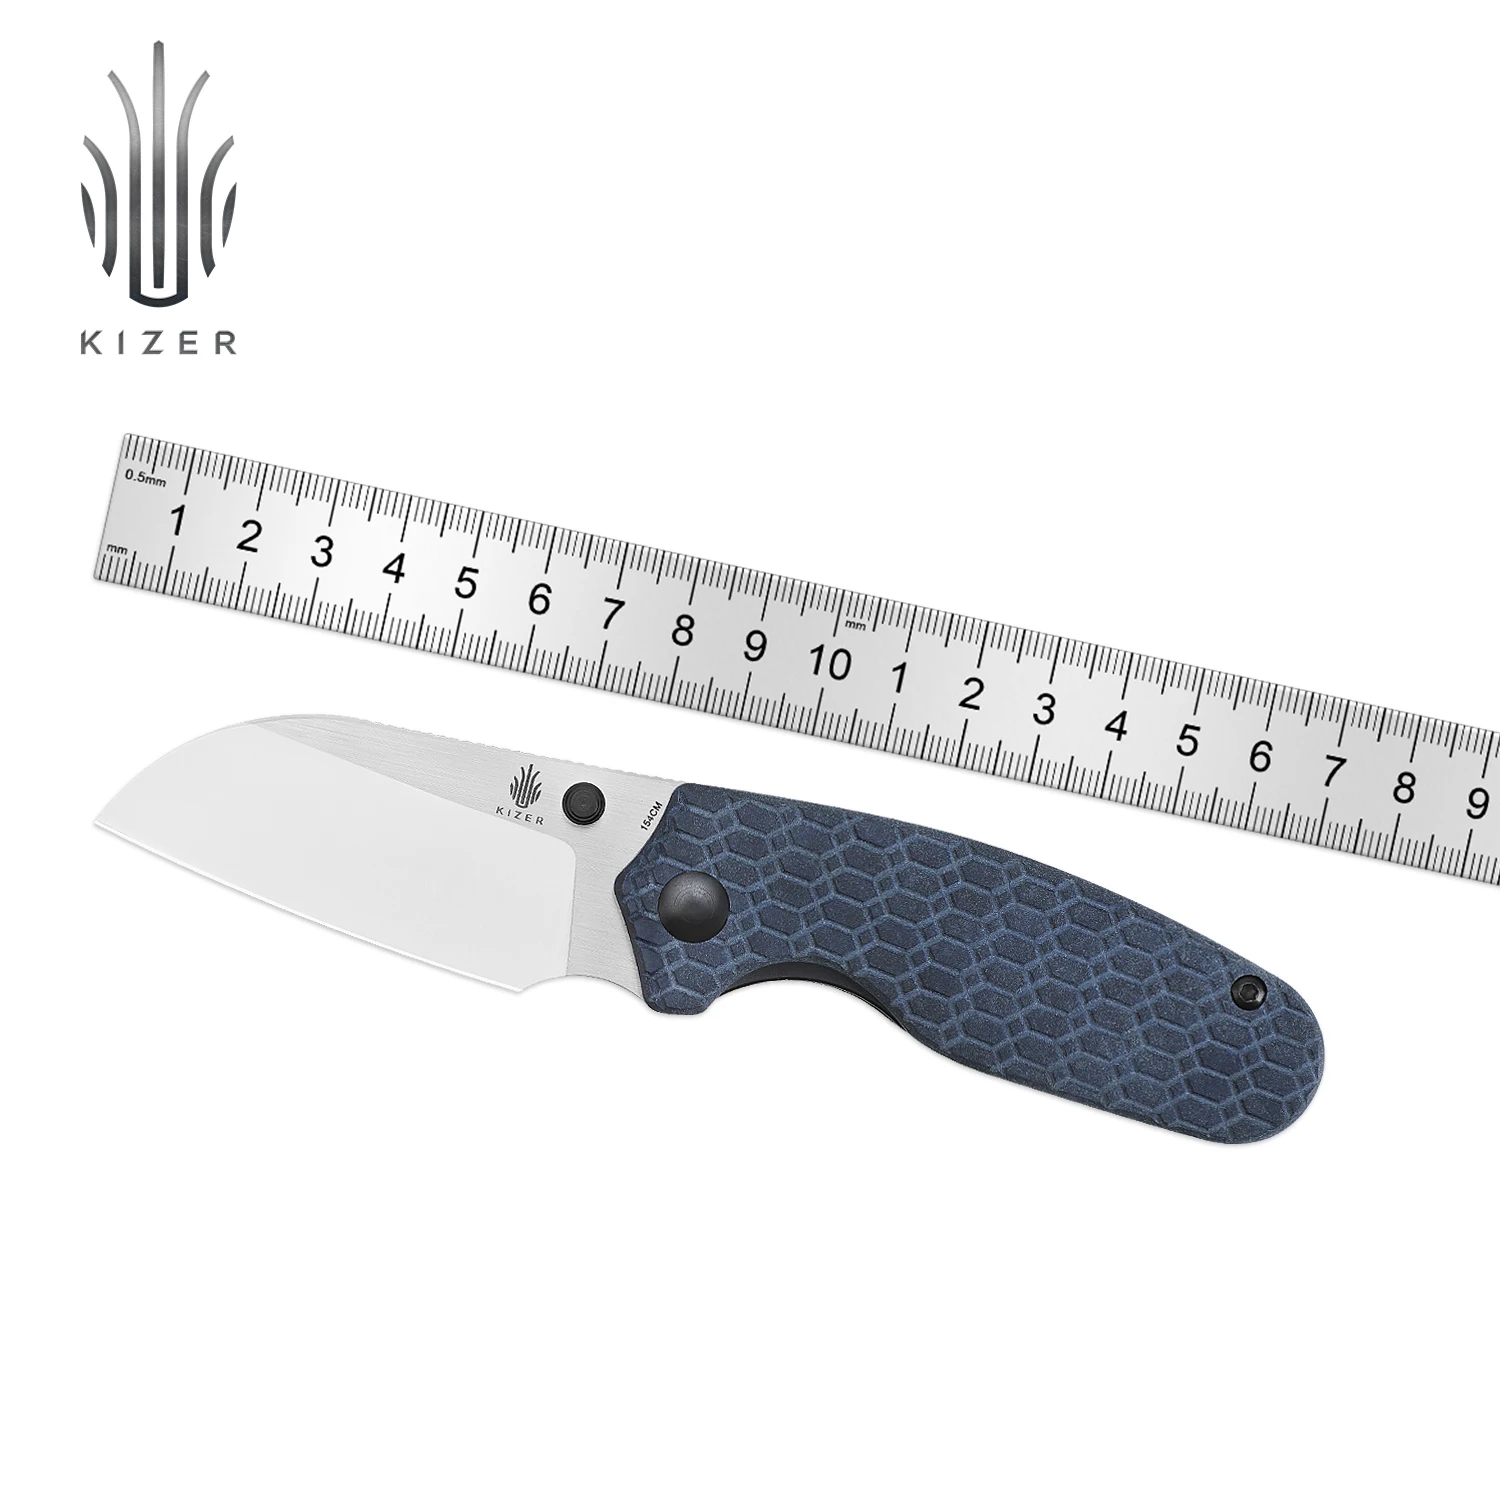 kizer-folding-knife-towser-s-v3593sc1-2022-new-blue-richlite-handle-edc-knife-with-154cm-steel-blade-outdoor-camping-tools